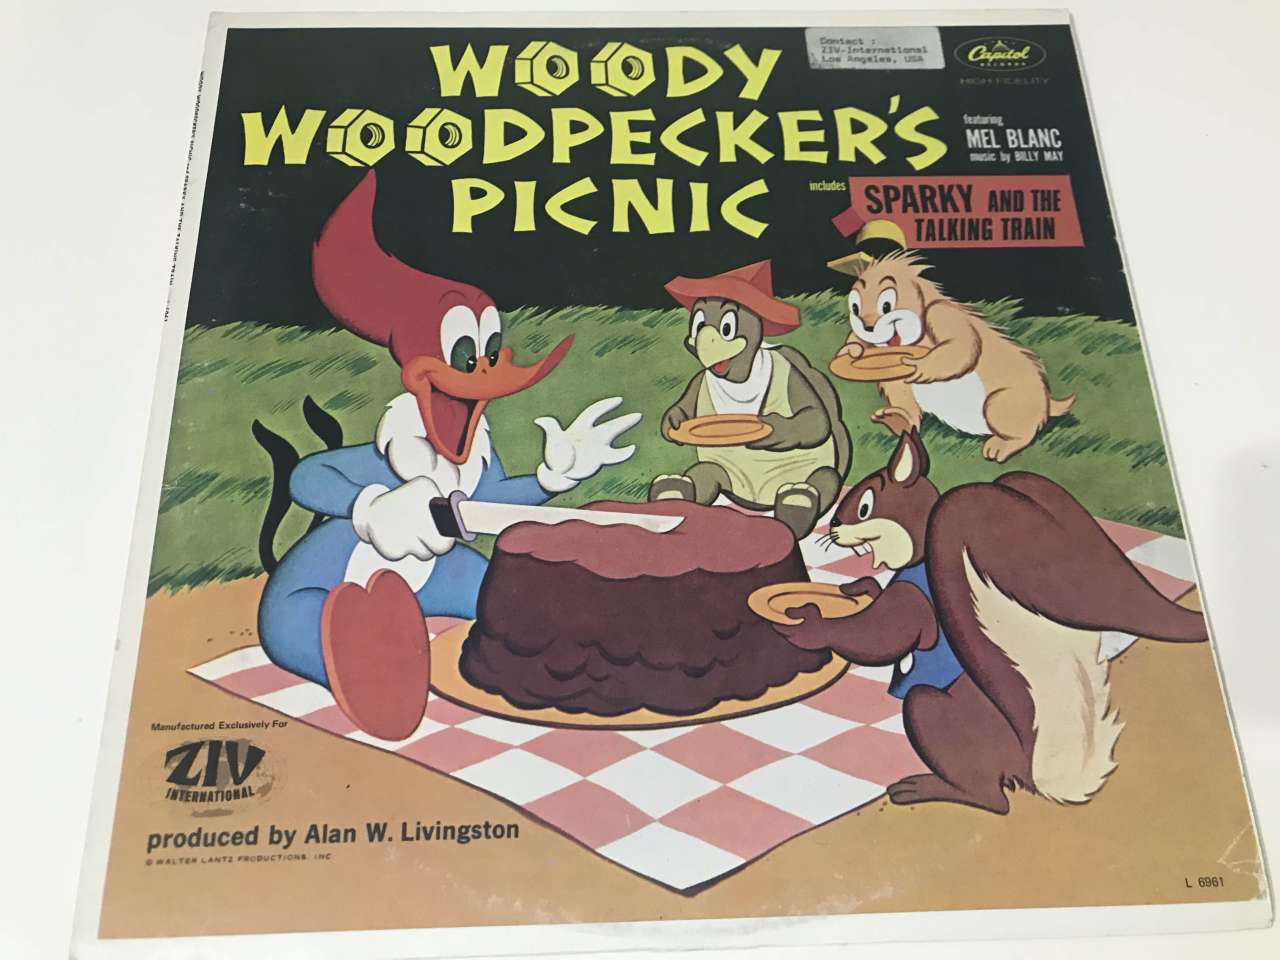 Mel Blanc / Henry Blair – Woody Woodpecker's Picnic / Sparky And The Talking Train